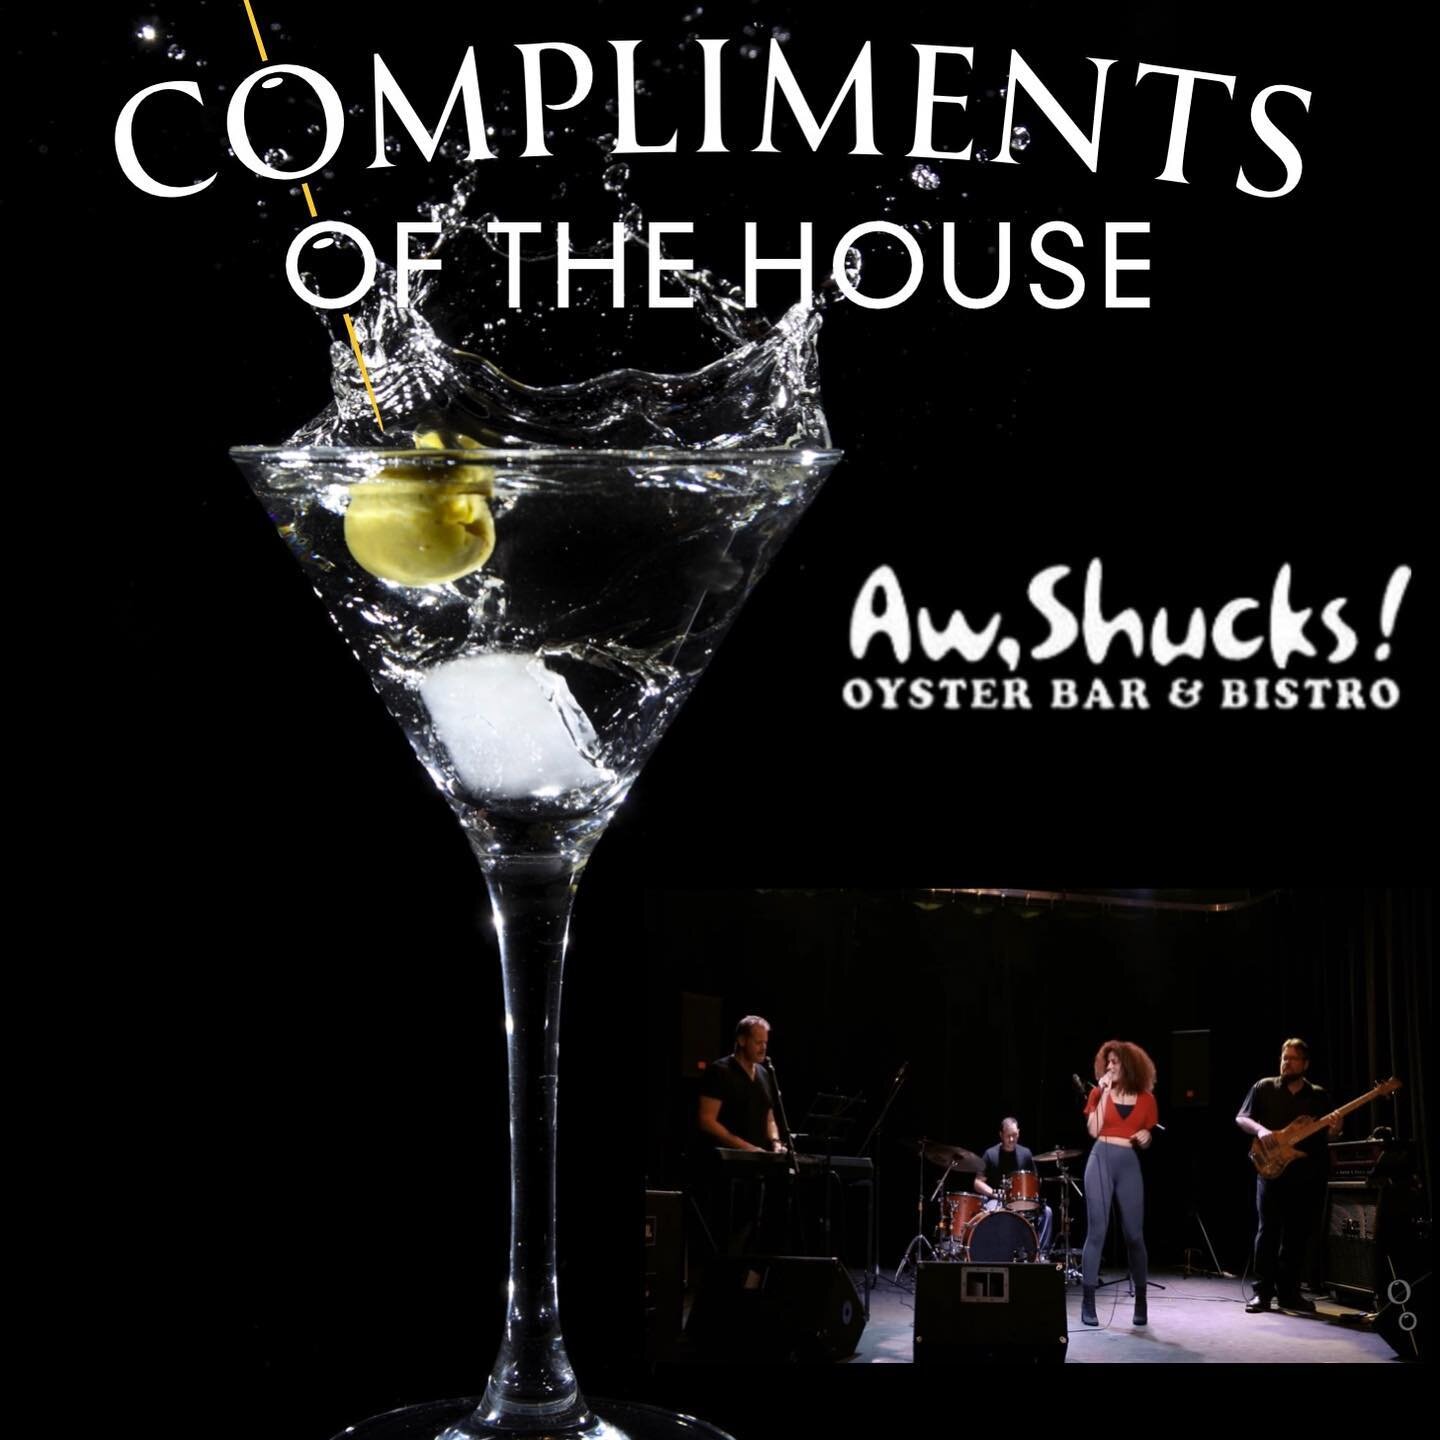 We are excited to be playing our phenomenal party/dance mix for a special corporate event @awshucks_aurora Fri Dec 3! Open to all regulars as well, so it should be a blast! 💥 See you there!